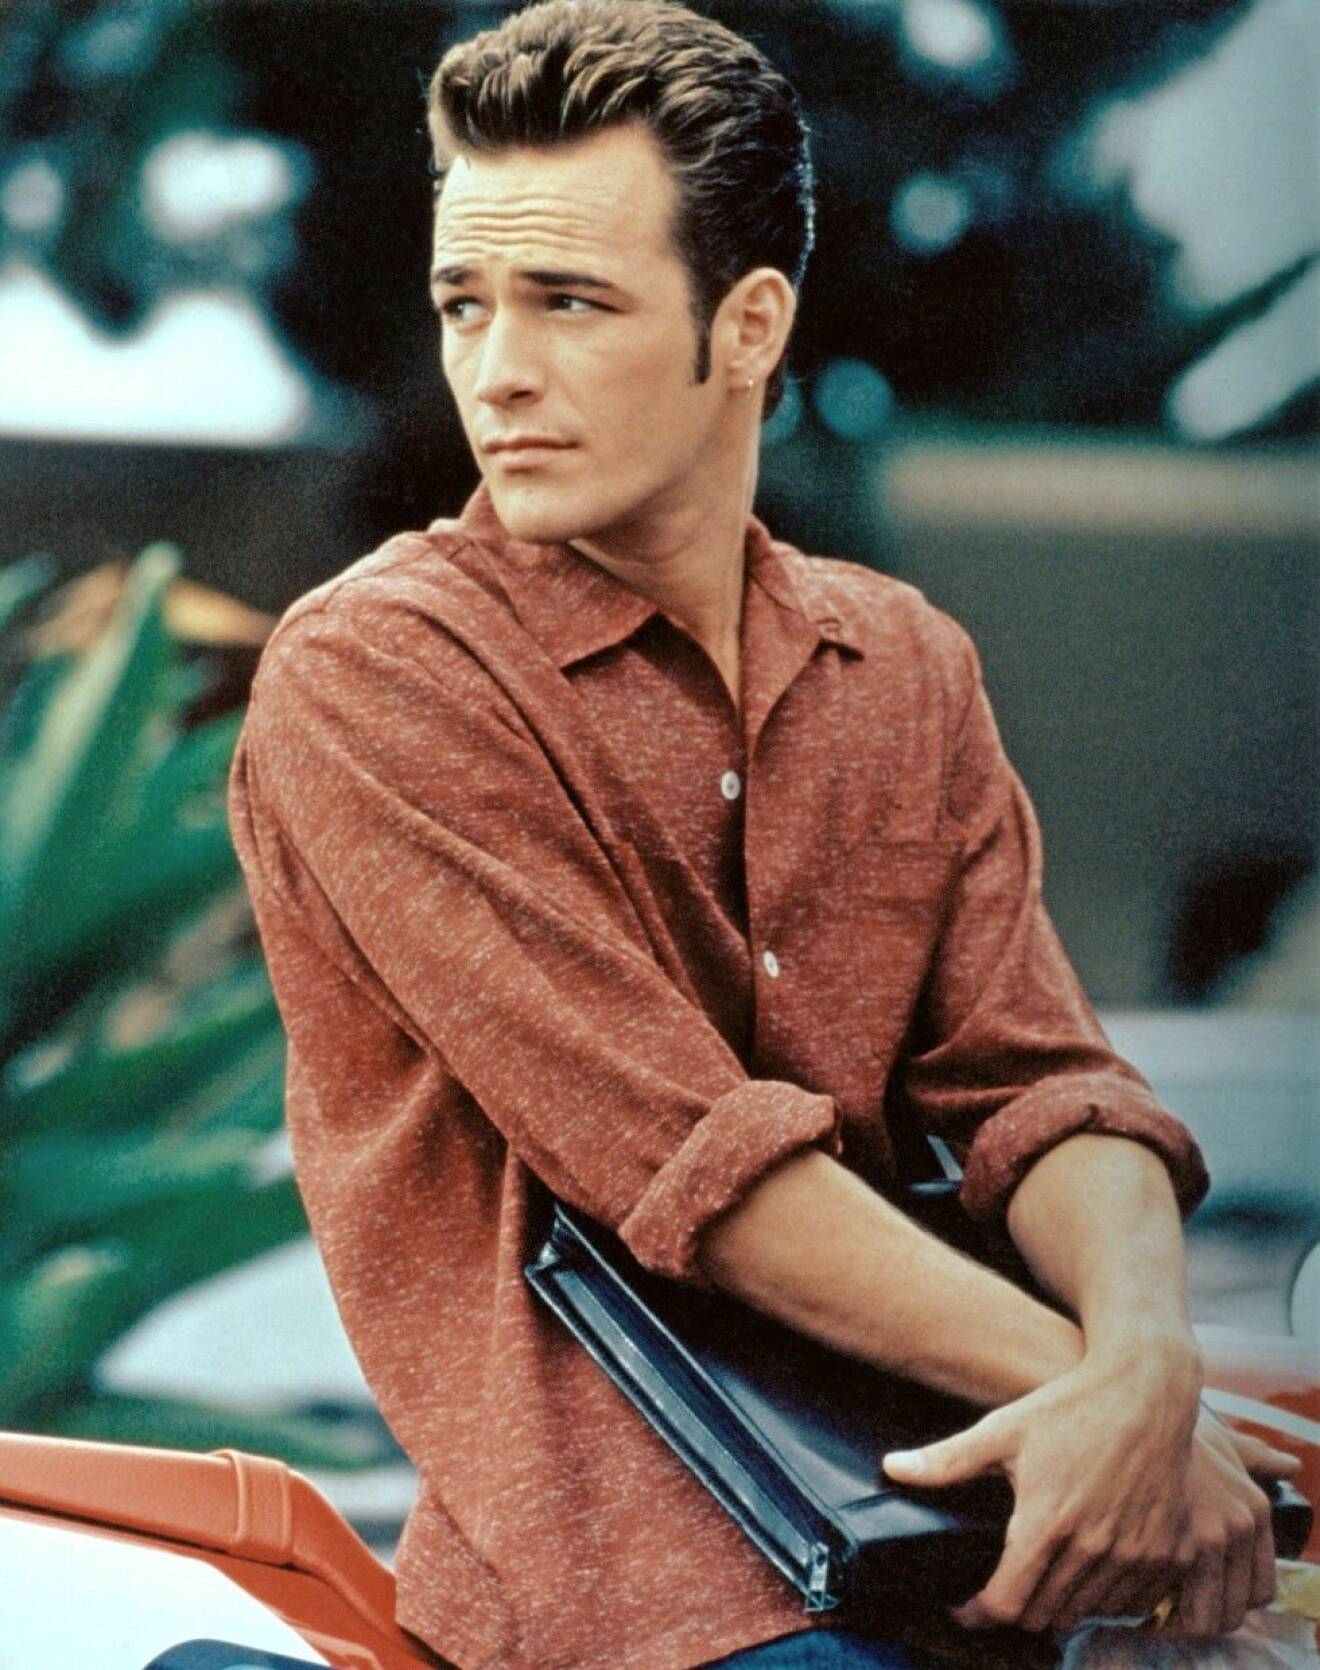 BEVERLY HILLS 90210, Luke Perry, 1990-2000. © Aaron Spelling Prod. / Courtesy: Everett Collection